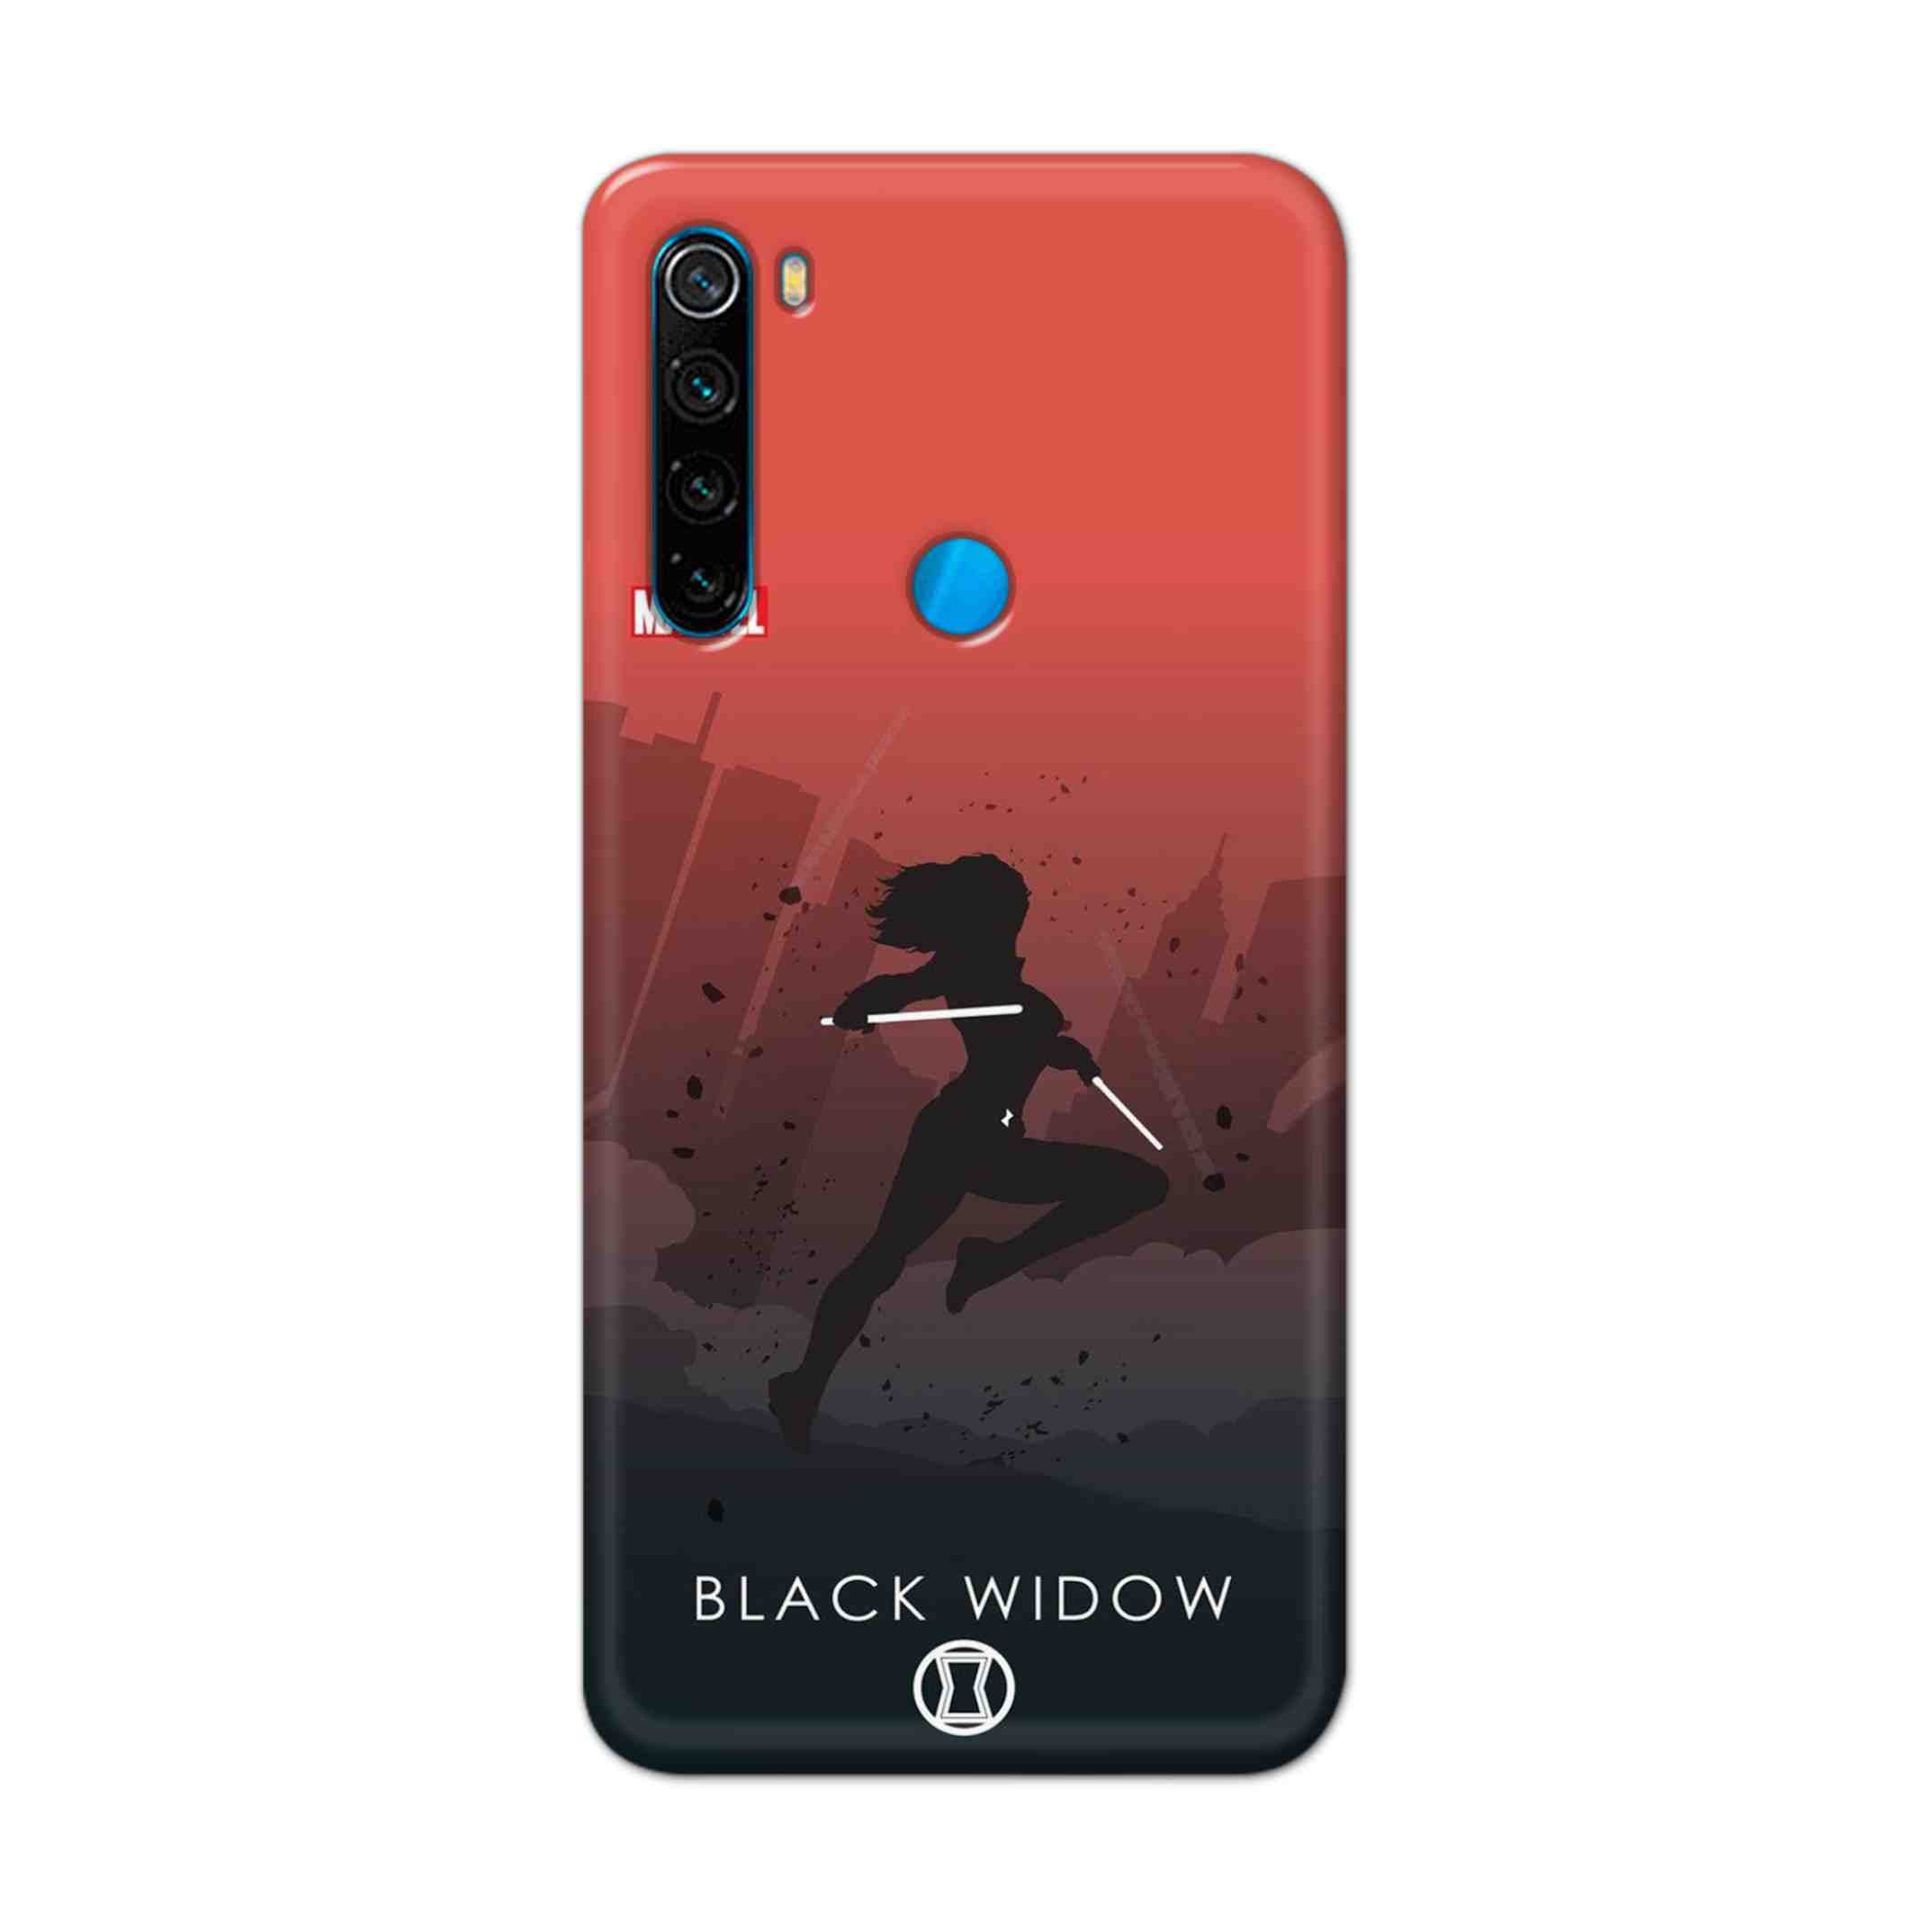 Buy Black Widow Hard Back Mobile Phone Case Cover For Xiaomi Redmi Note 8 Online